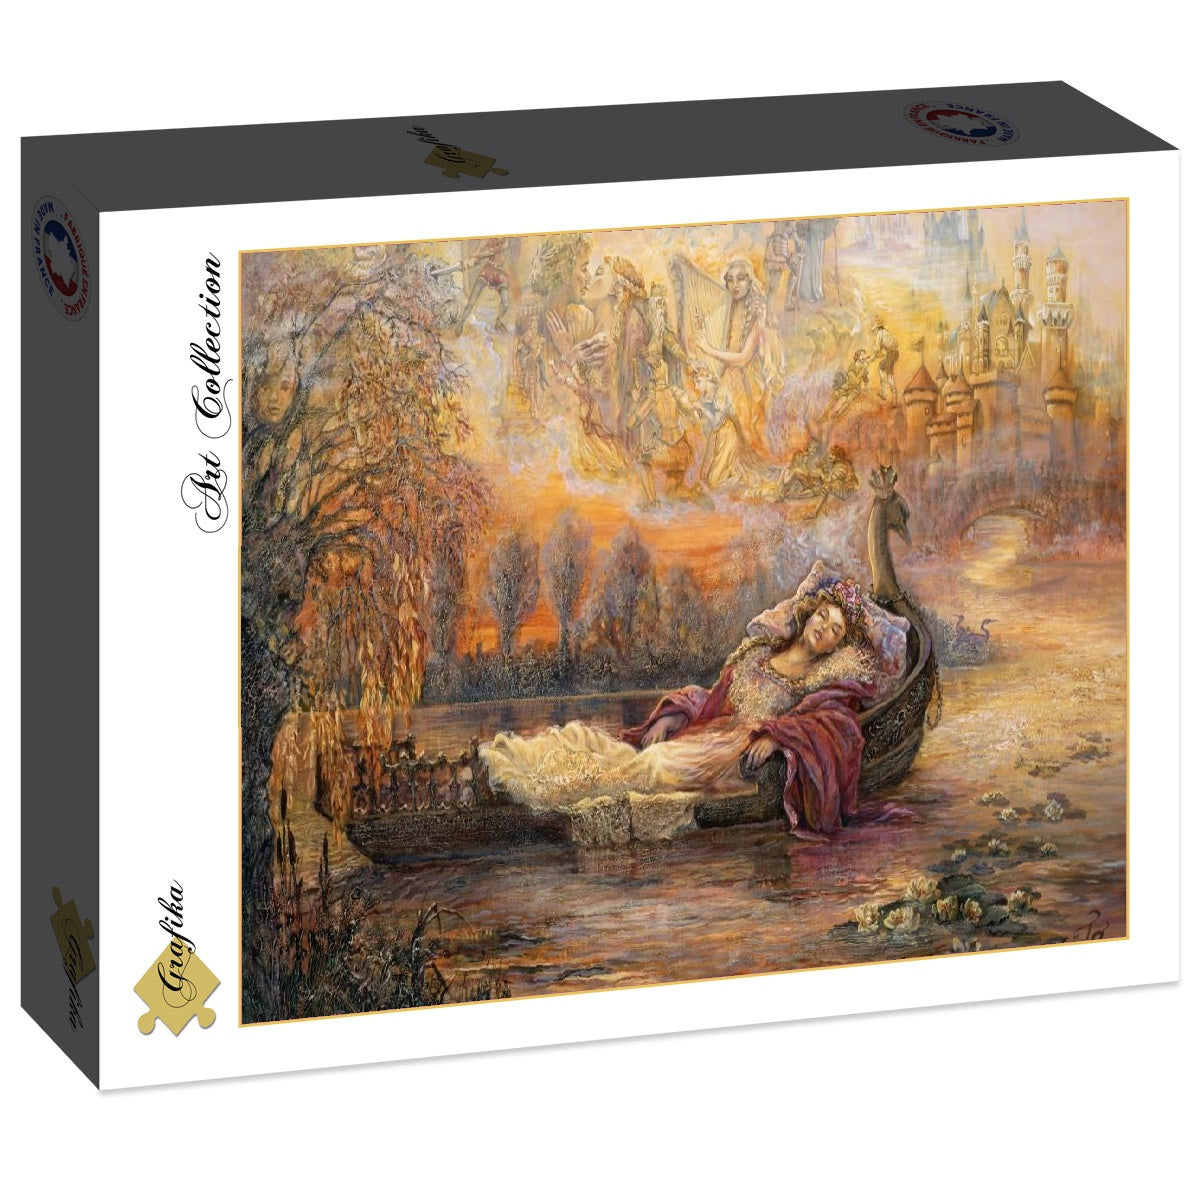 Dreams of Camelot af Josephine Wall, 2000 Piece Puzzle